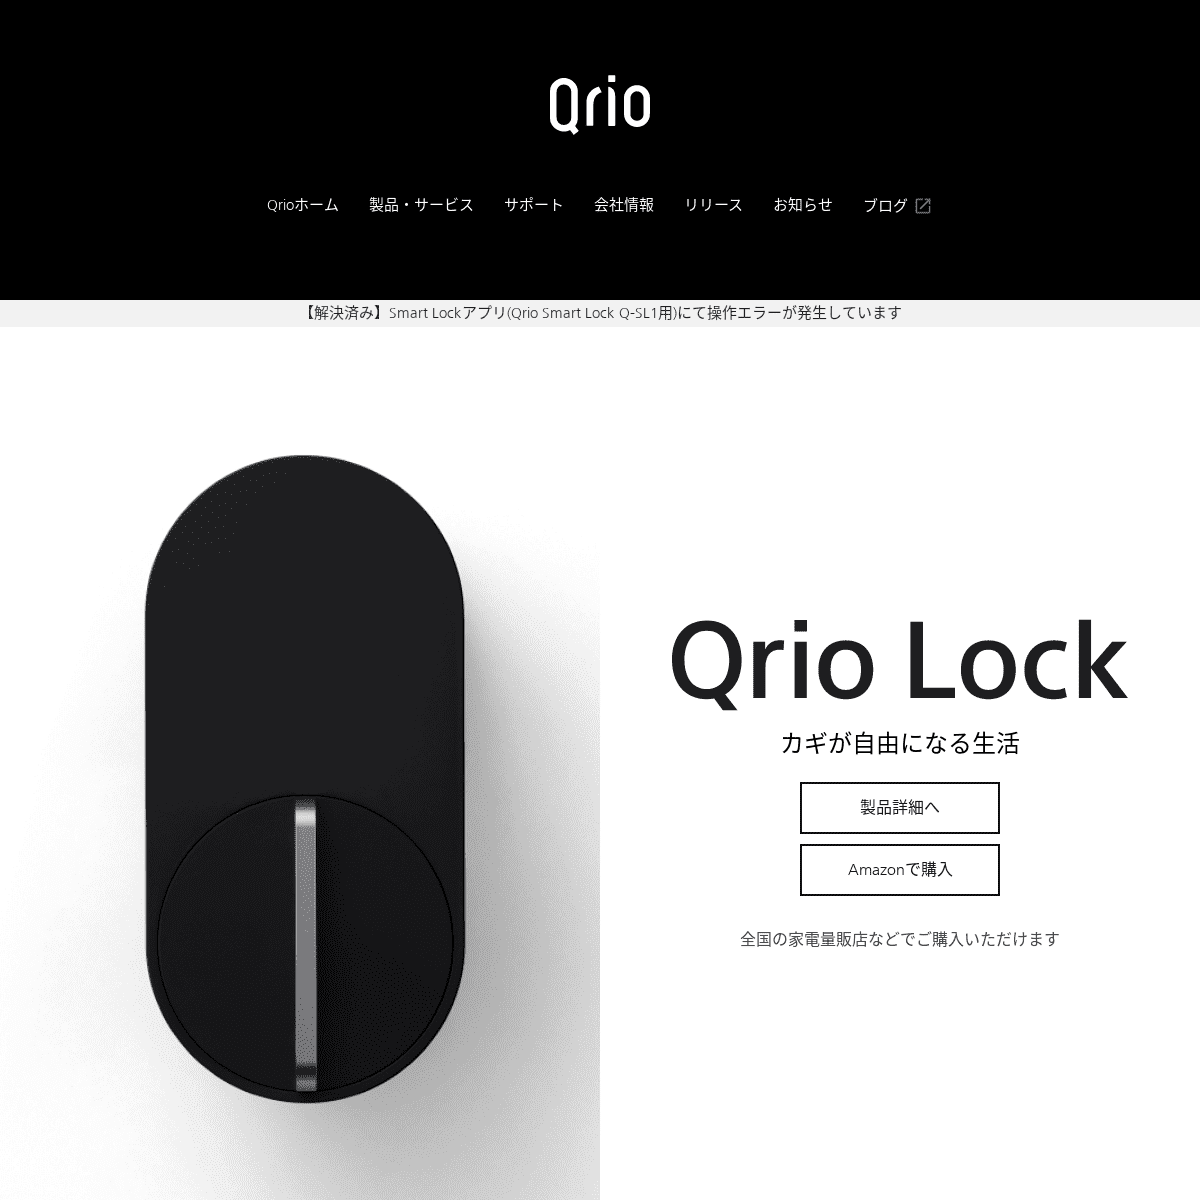 A complete backup of https://qrio.me